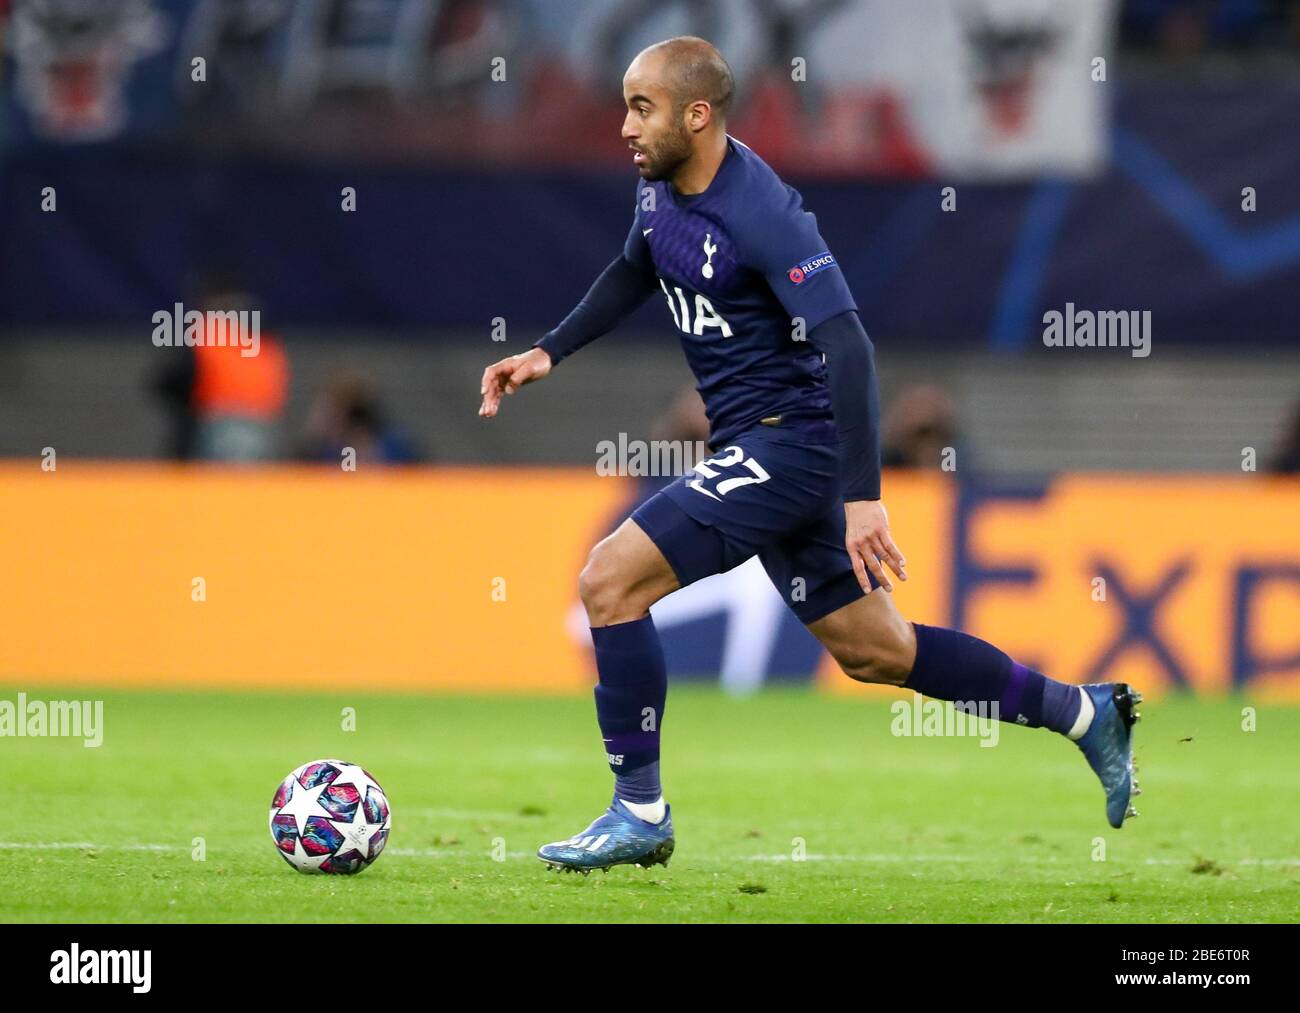 Leipzig, Germany. 10th Mar, 2020. Football: Champions League, Round of 16, RB Leipzig - Tottenham Hotspur in the Red Bull Arena. Tottenham's Lucas Moura on the ball. Credit: Jan Woitas/dpa-Zentralbild/dpa/Alamy Live News Stock Photo